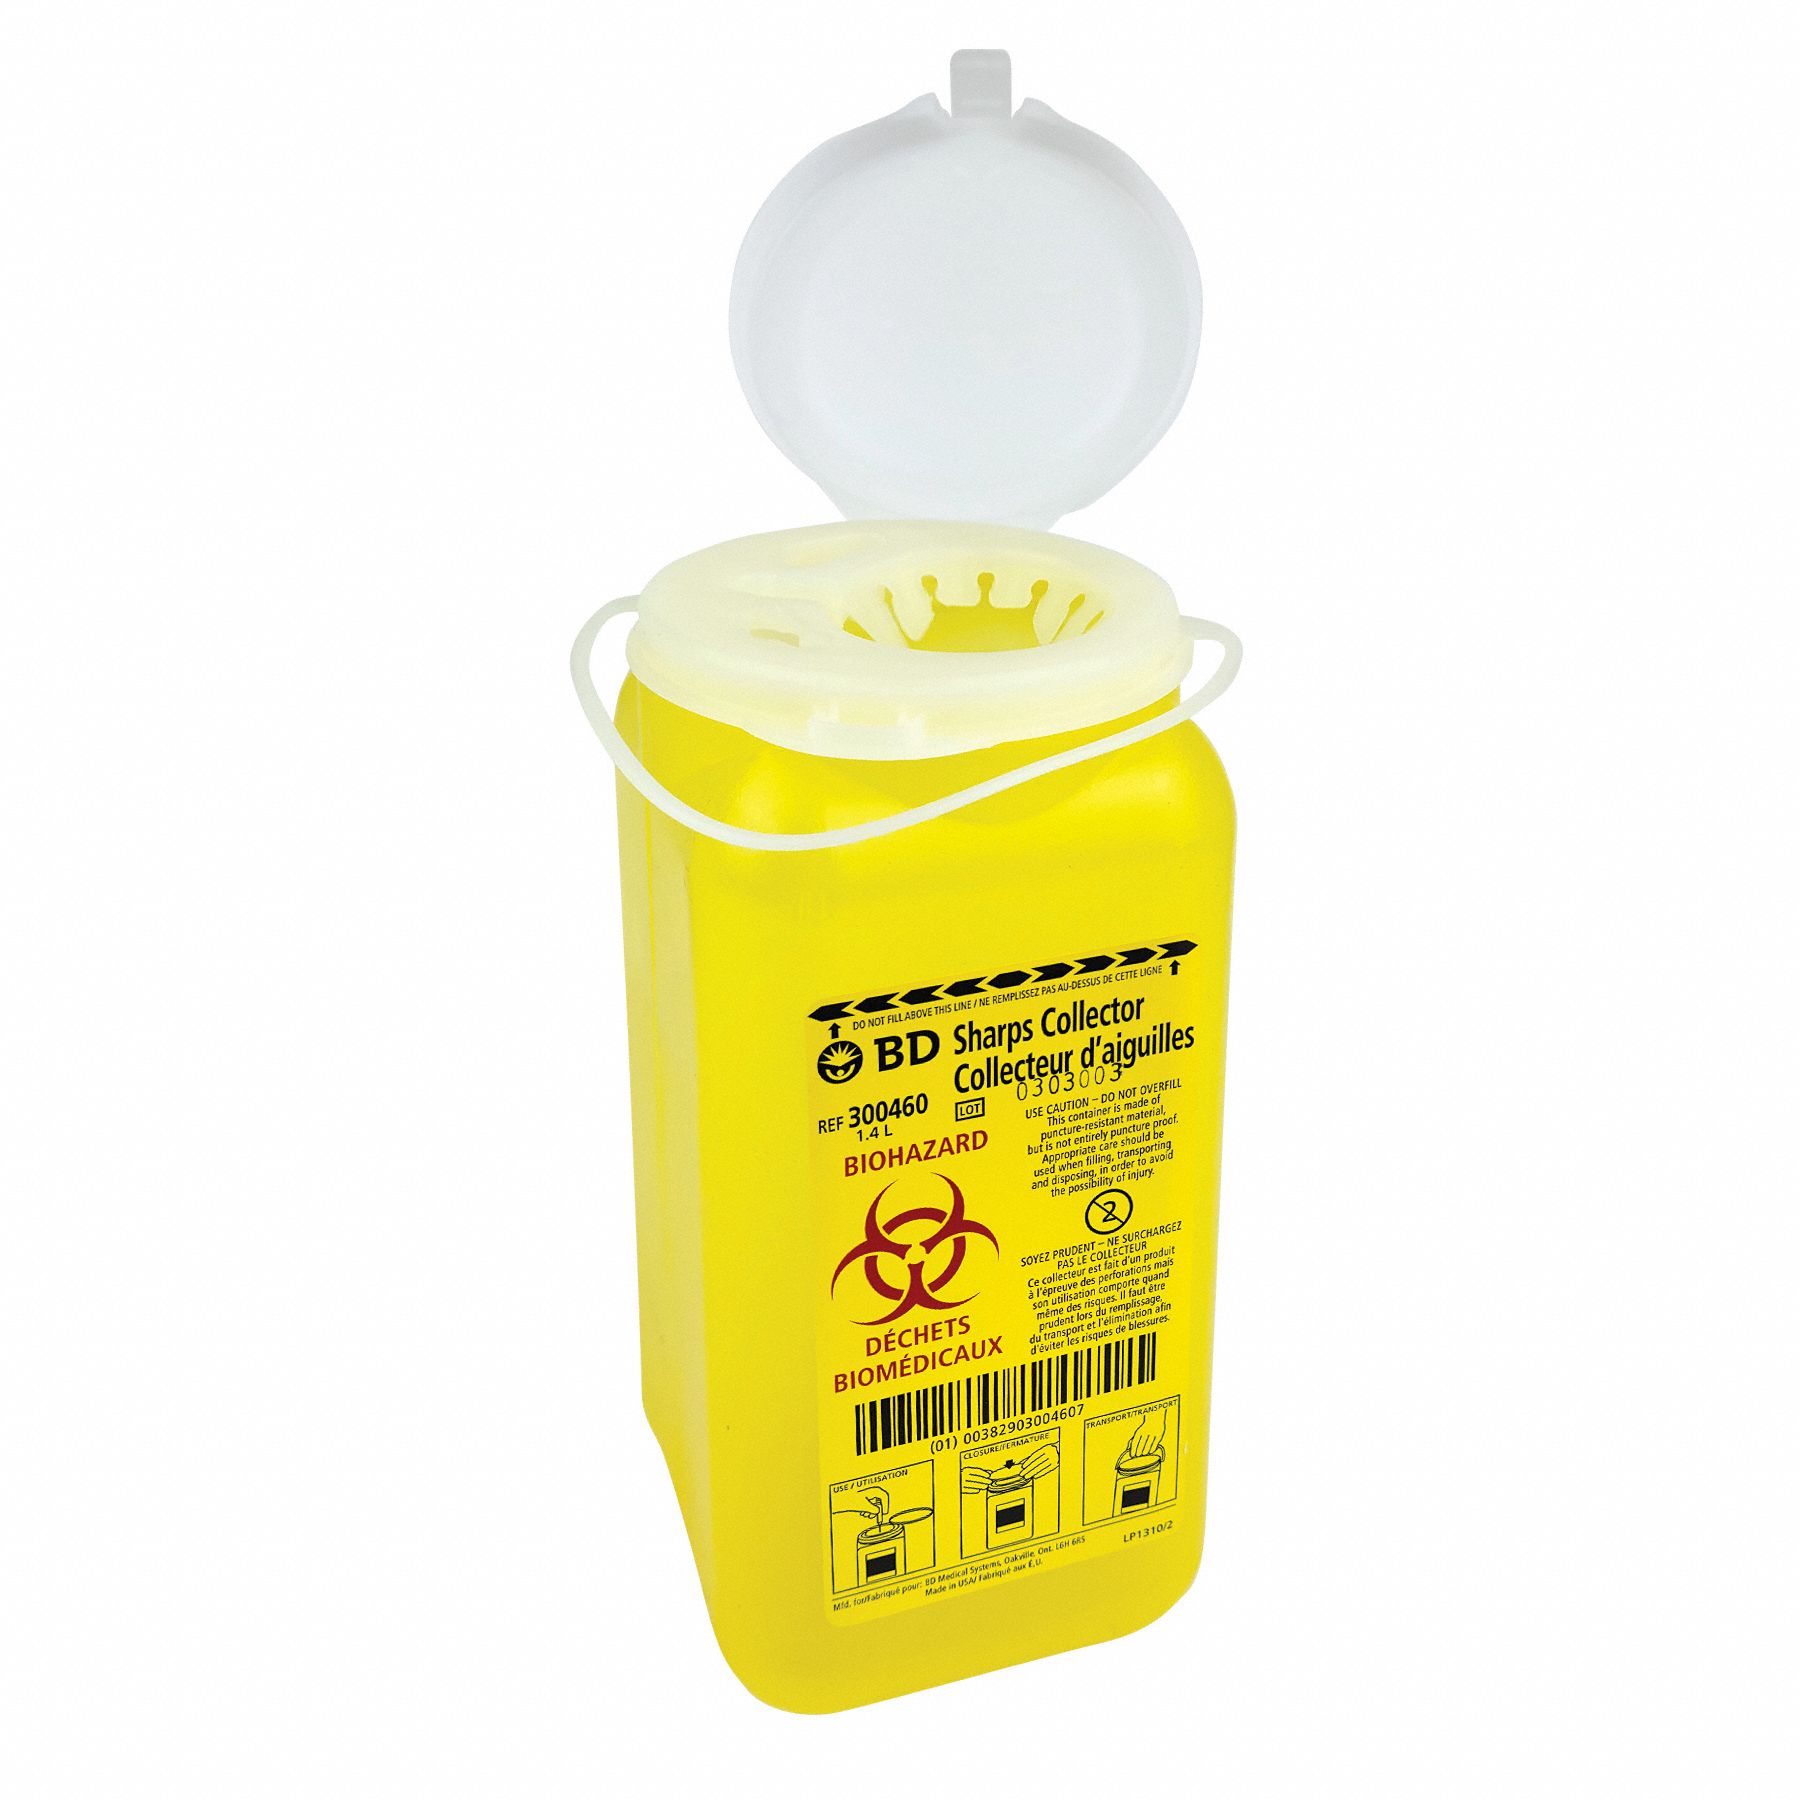 BD SHARPS CONTAINER, 1.4L